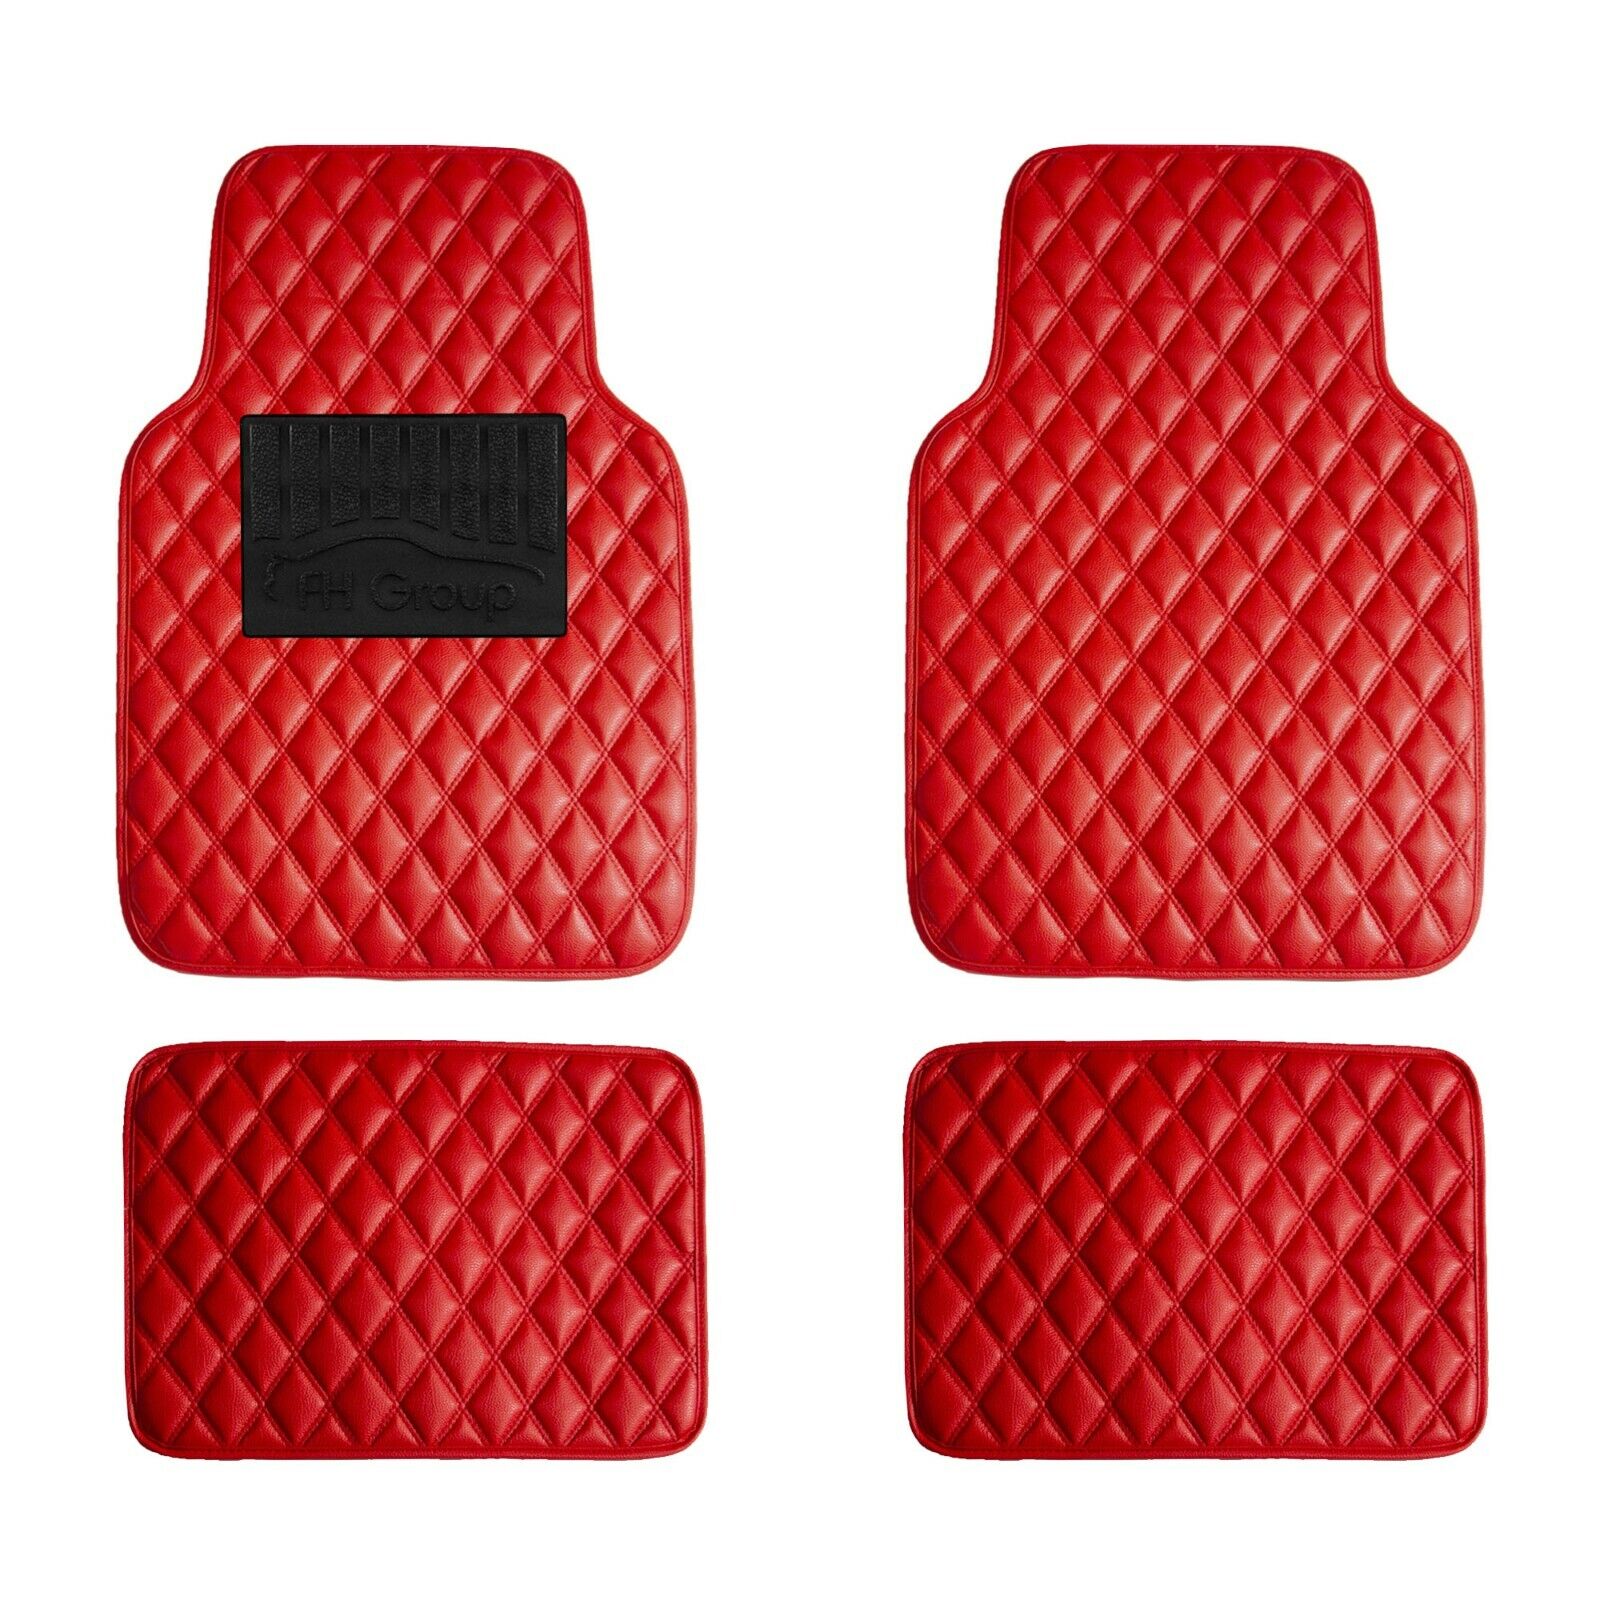 Universal Leather Floor Mats for Car Auto Diamond Pattern Red